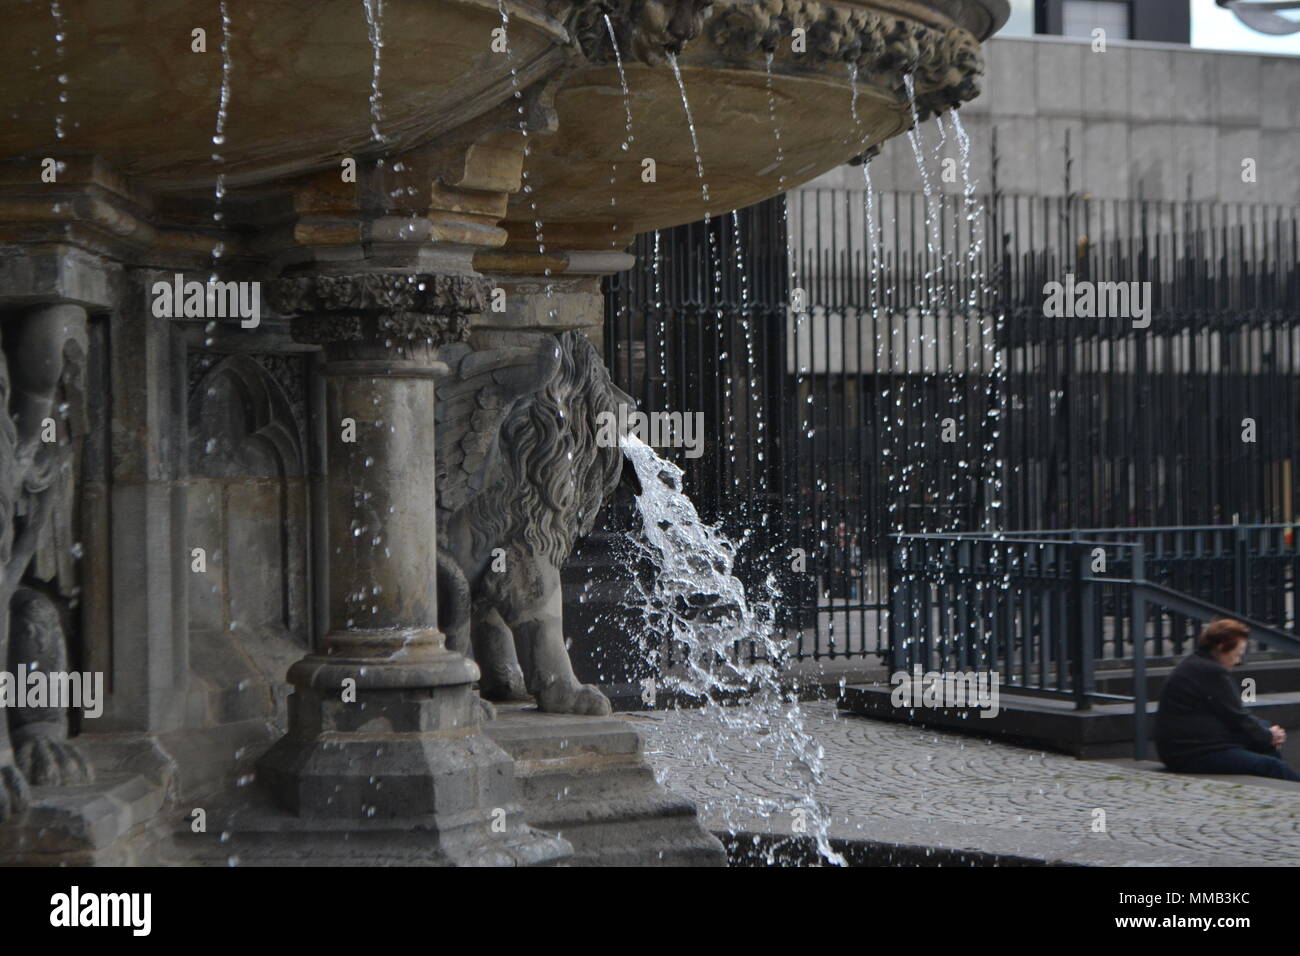 Lions Fountain Water Cologne Germany Stock Photo